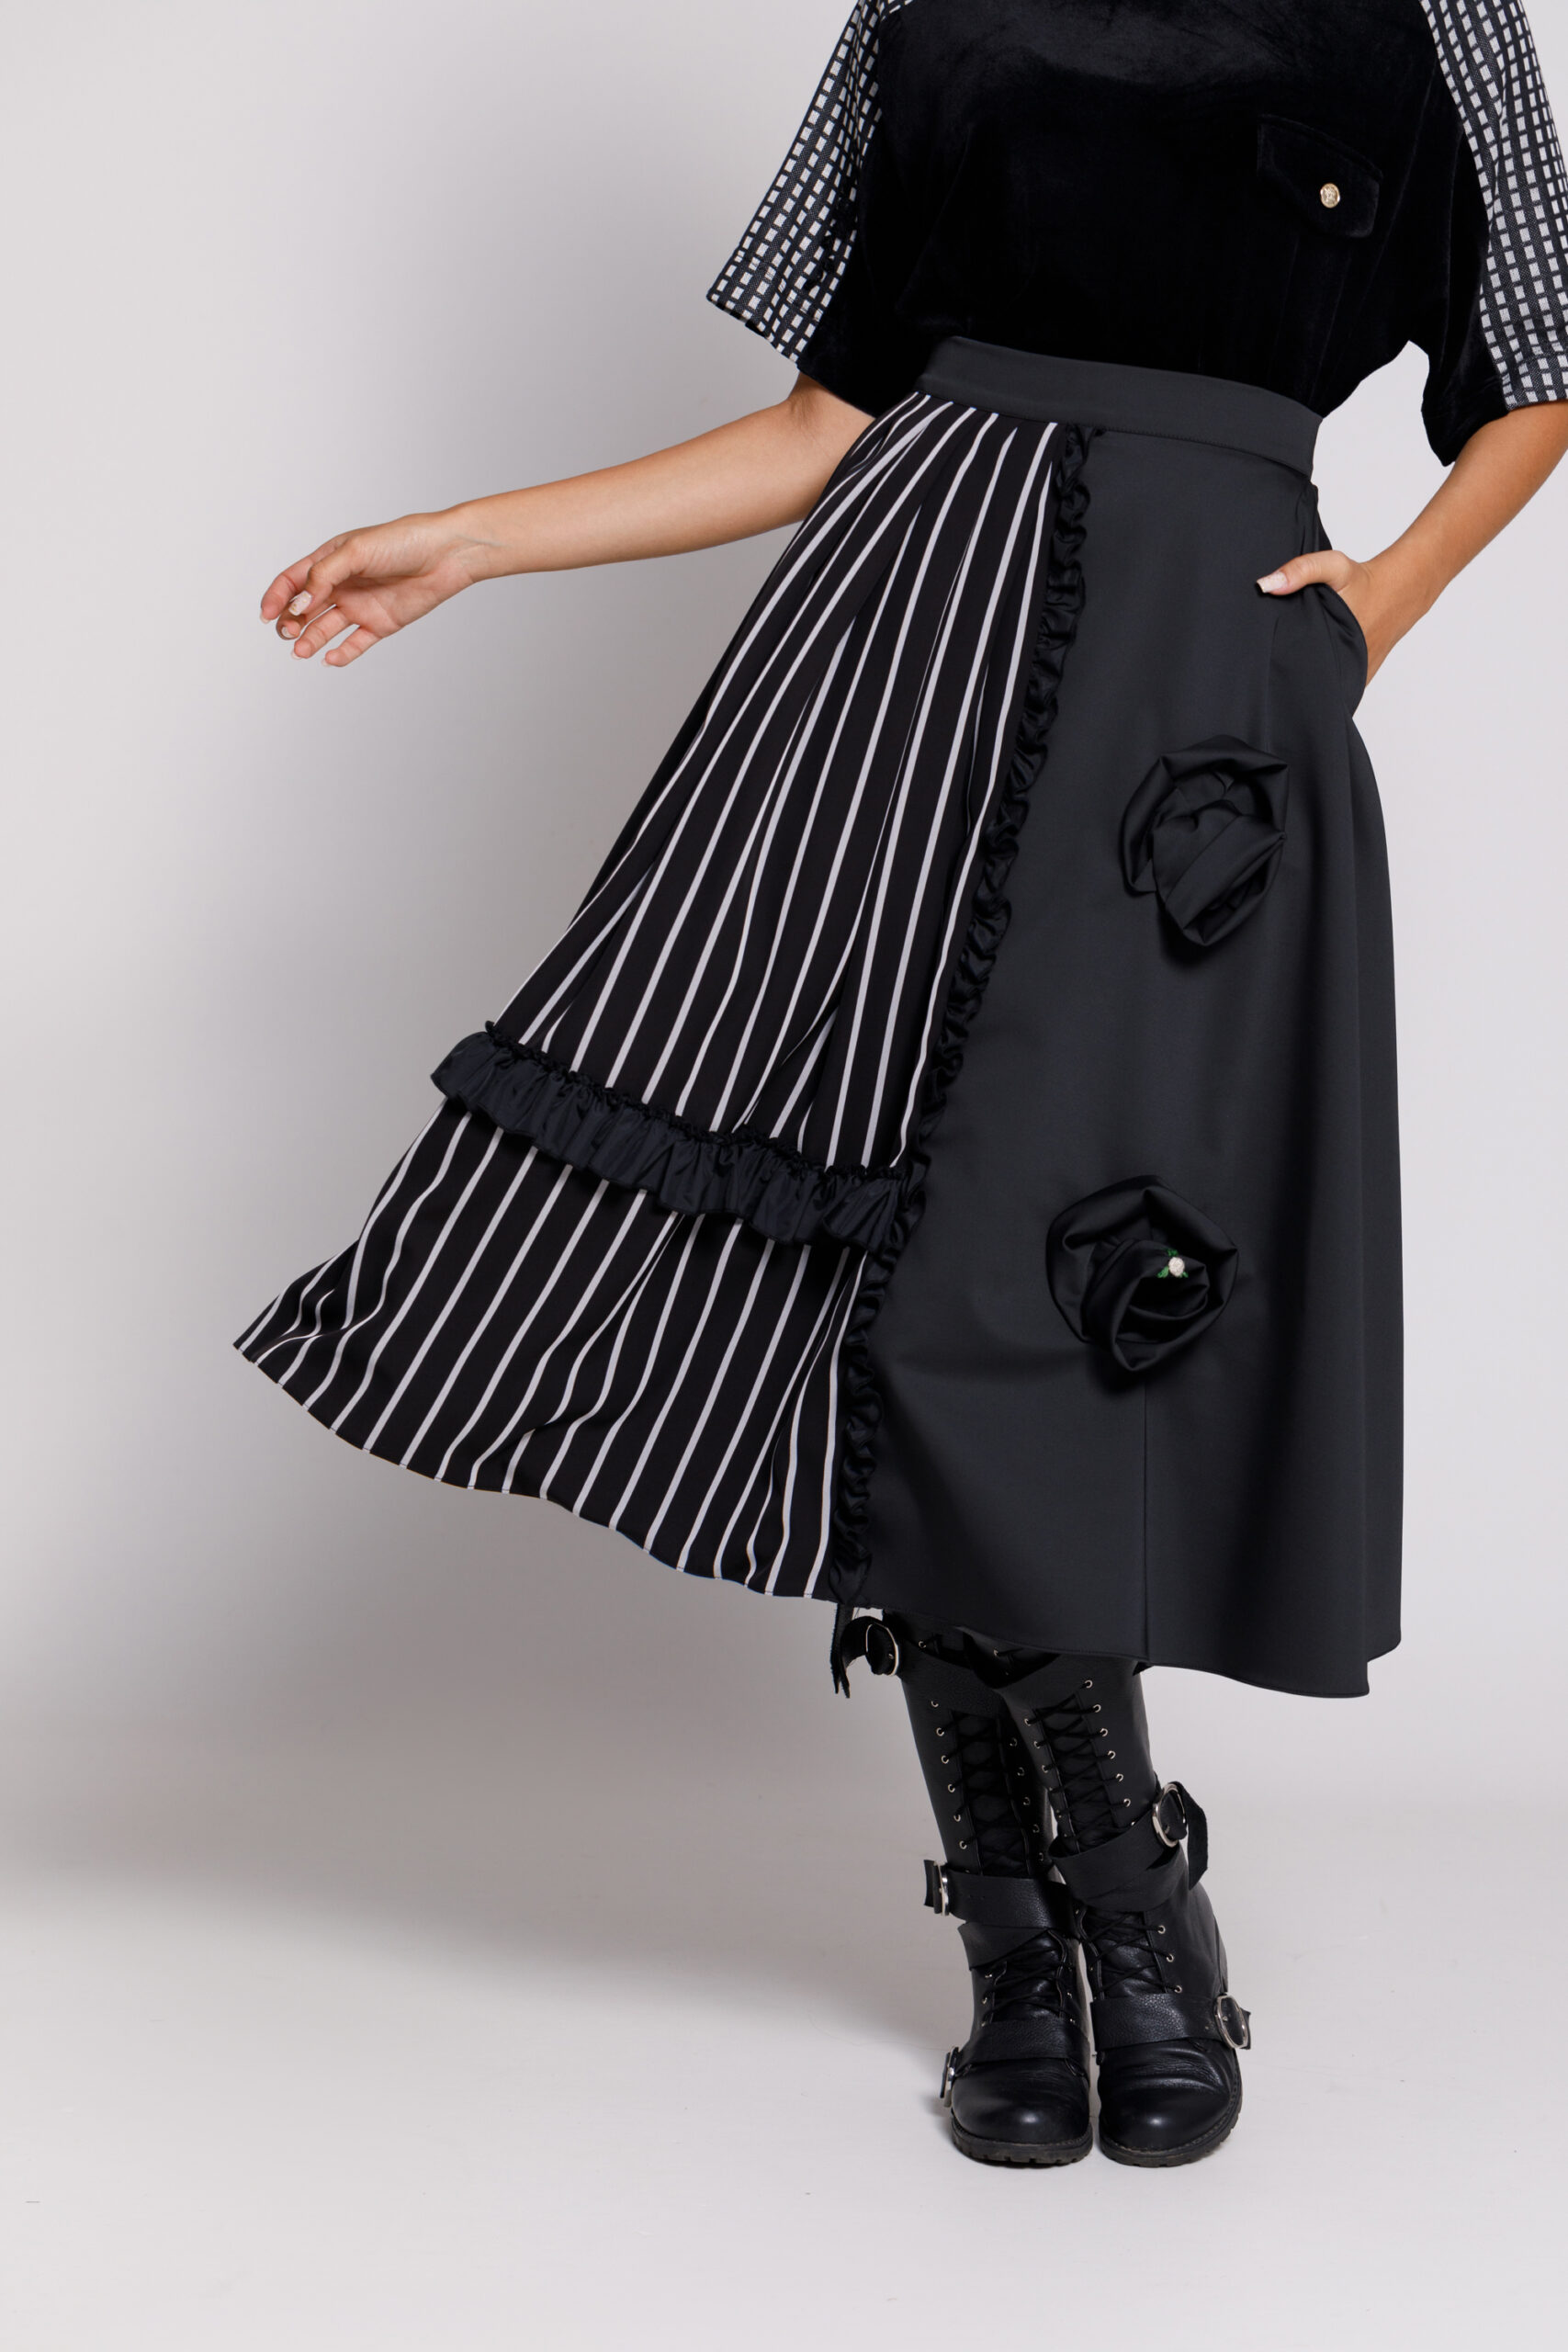 MIST casual black skirt with stripes and volumetric flowers. Natural fabrics, original design, handmade embroidery